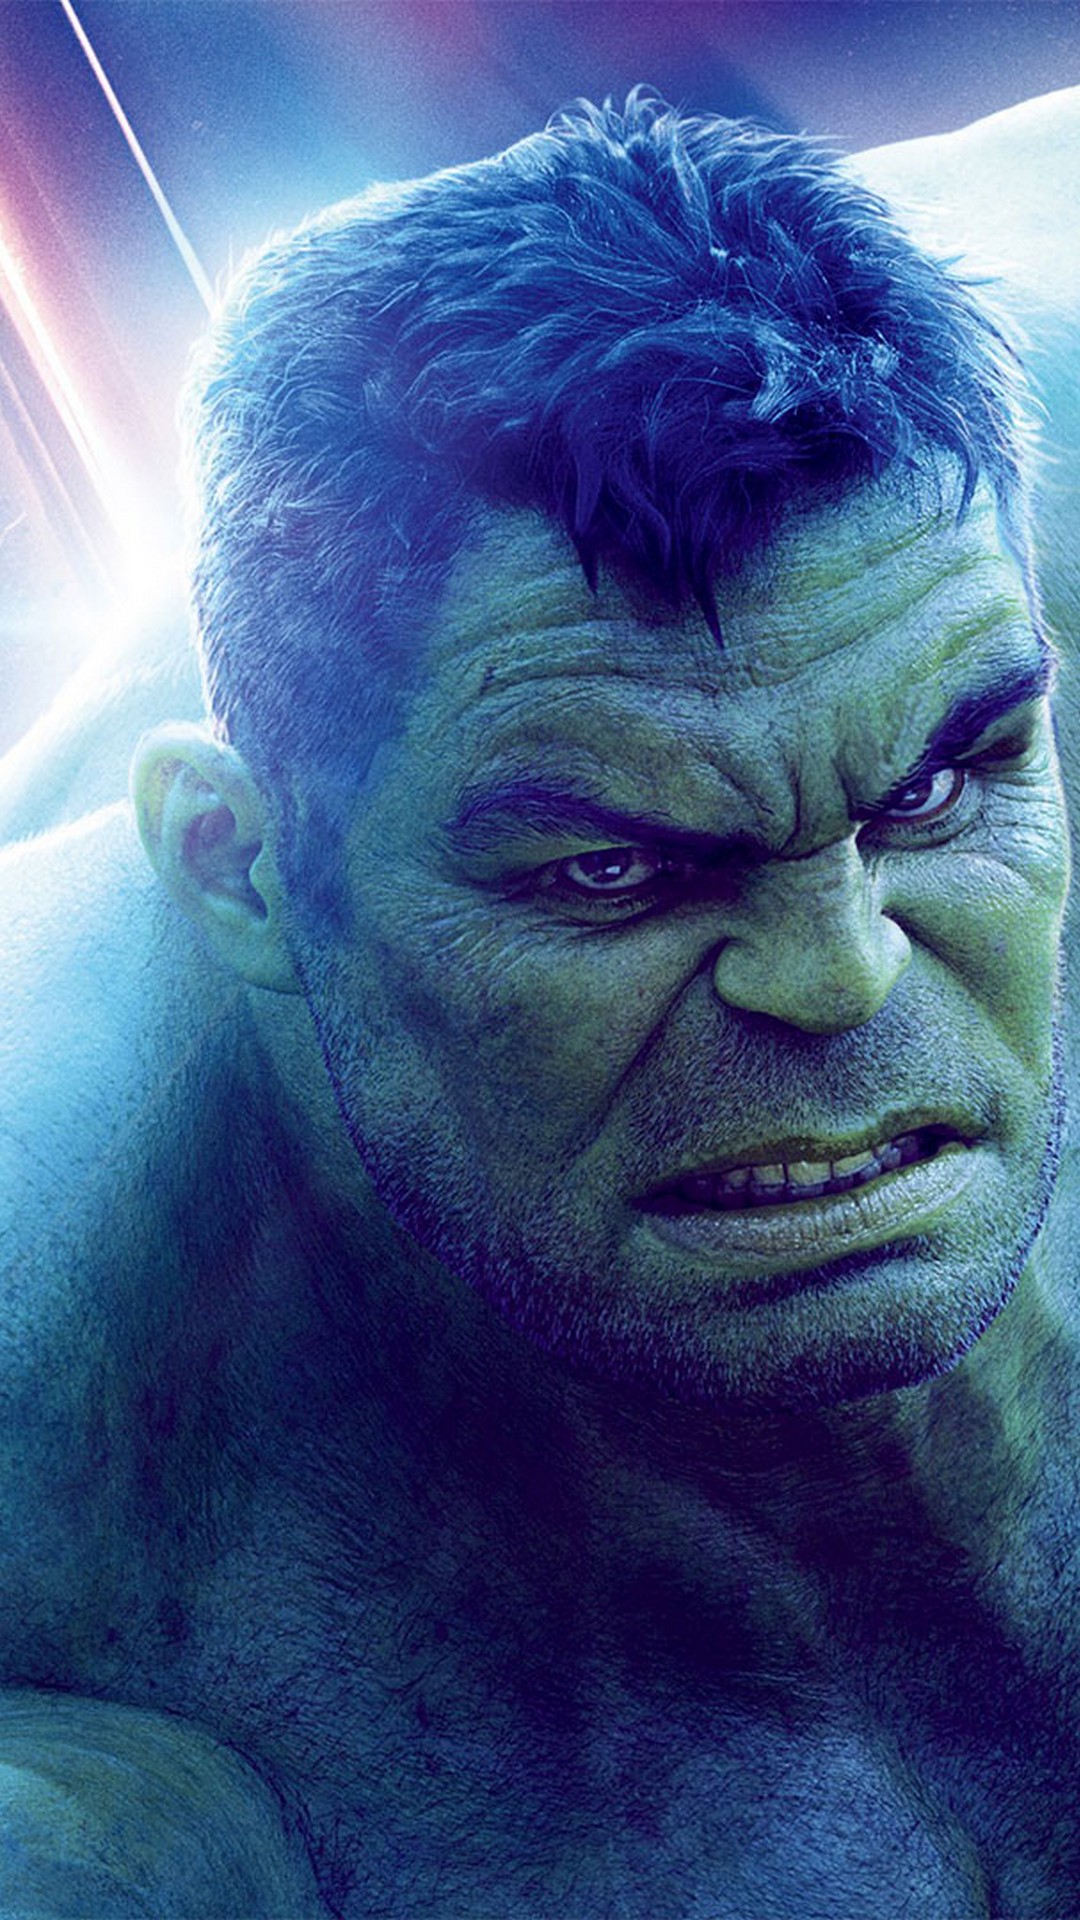 Hulk Avengers Endgame Iphone Wallpaper With High-resolution , HD Wallpaper & Backgrounds